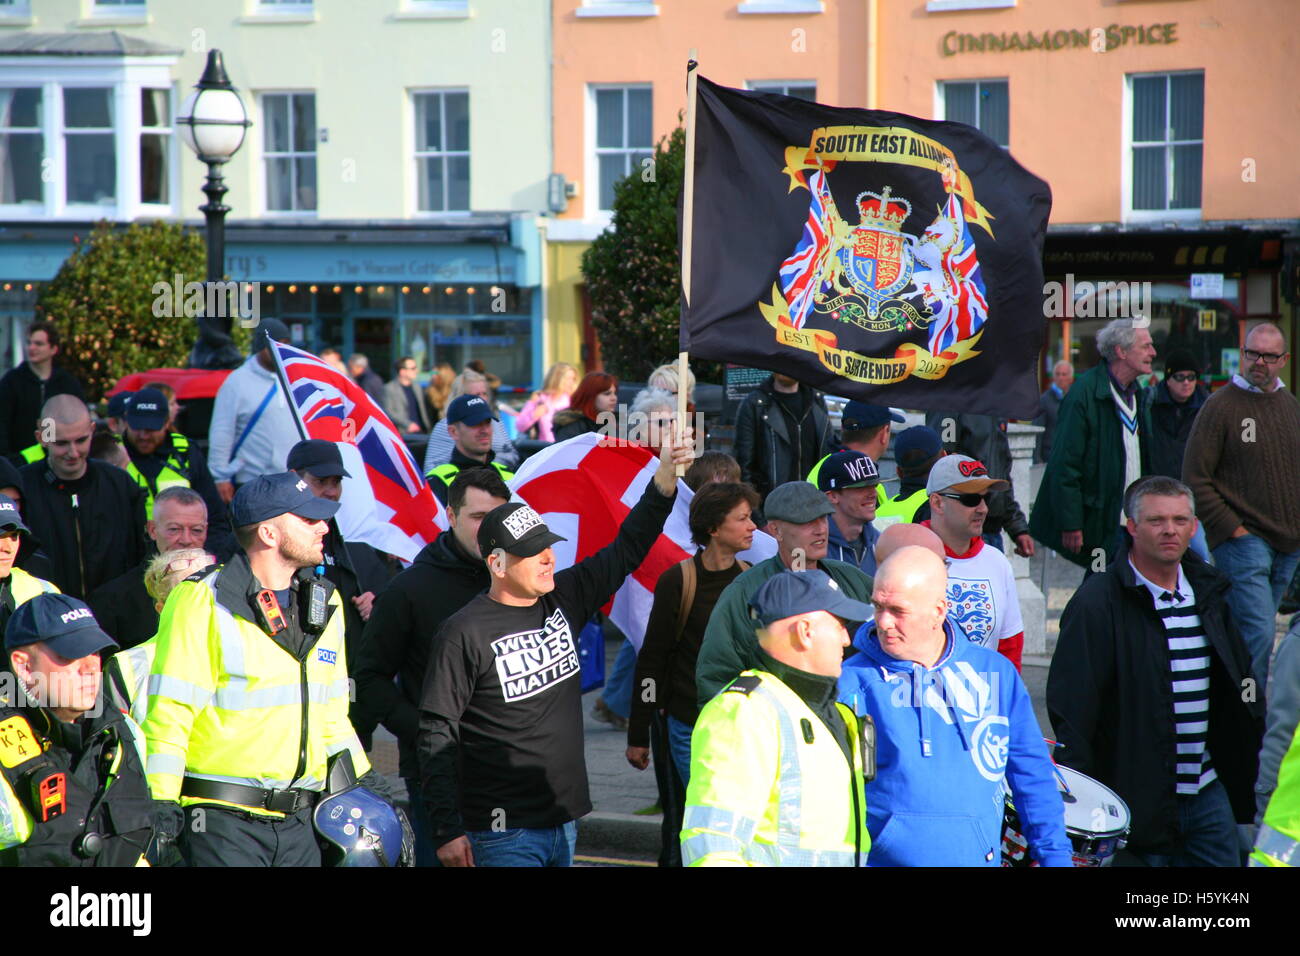 Margate, Kent, UK. 22nd October, 2016. A man with White Lives Matter shirt. The right wing group White Lives Matter (WLM) march in the town. This is the first WLM demonstration in the UK. A counter demonstration, Margate Rocks Against Racism (MRAR) is taking place in the town at the same time. Penelope Barritt/Alamy Live News Stock Photo